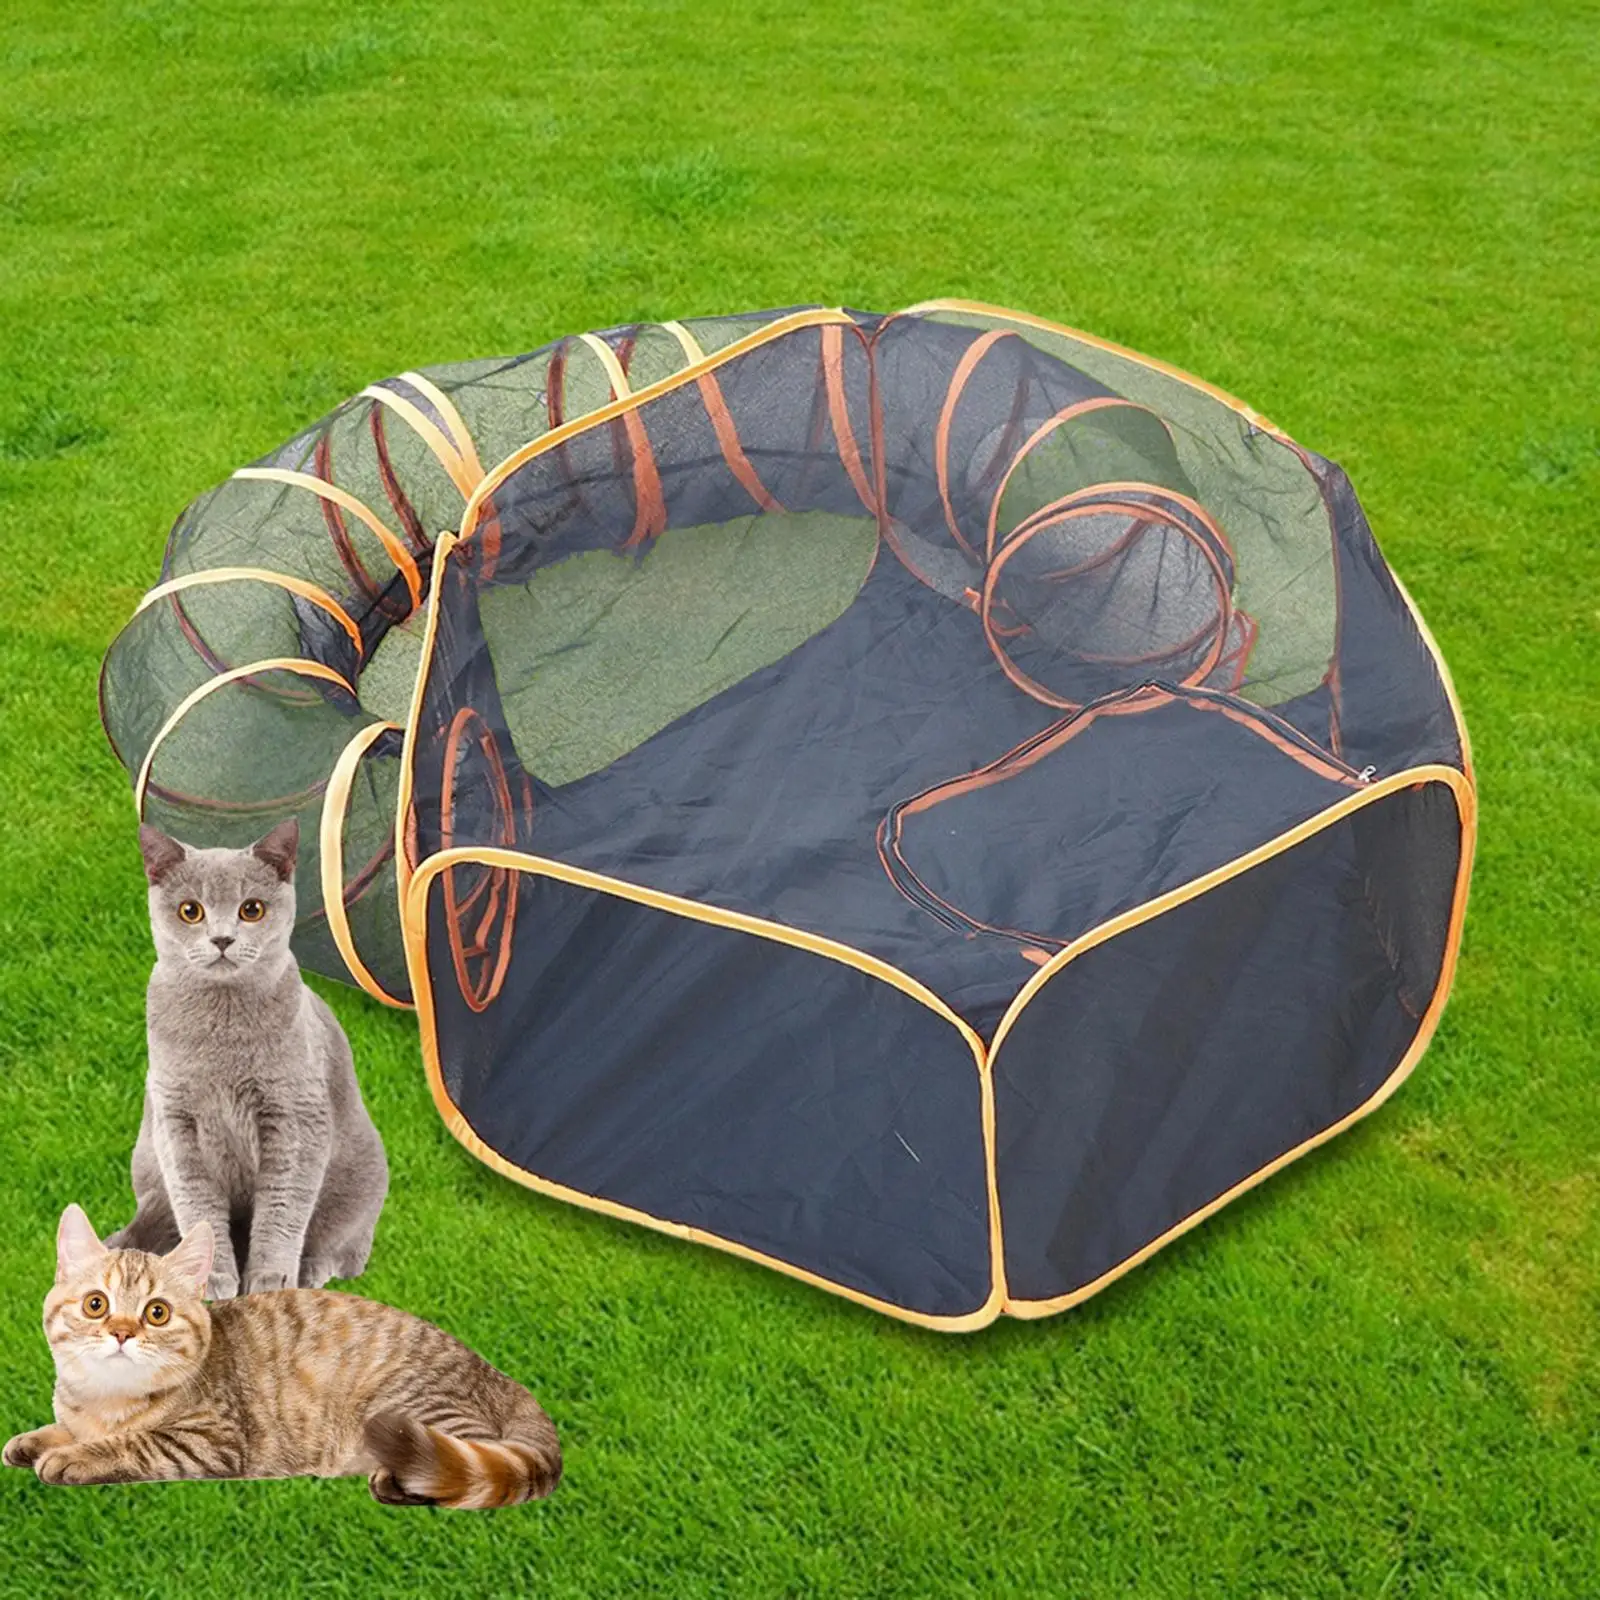 Cat Tunnel Indoor Cats Lightweight Cat Activity Center Cat Tunnel Tube Collapsible Play Tunnel Play Tunnels for Hamster